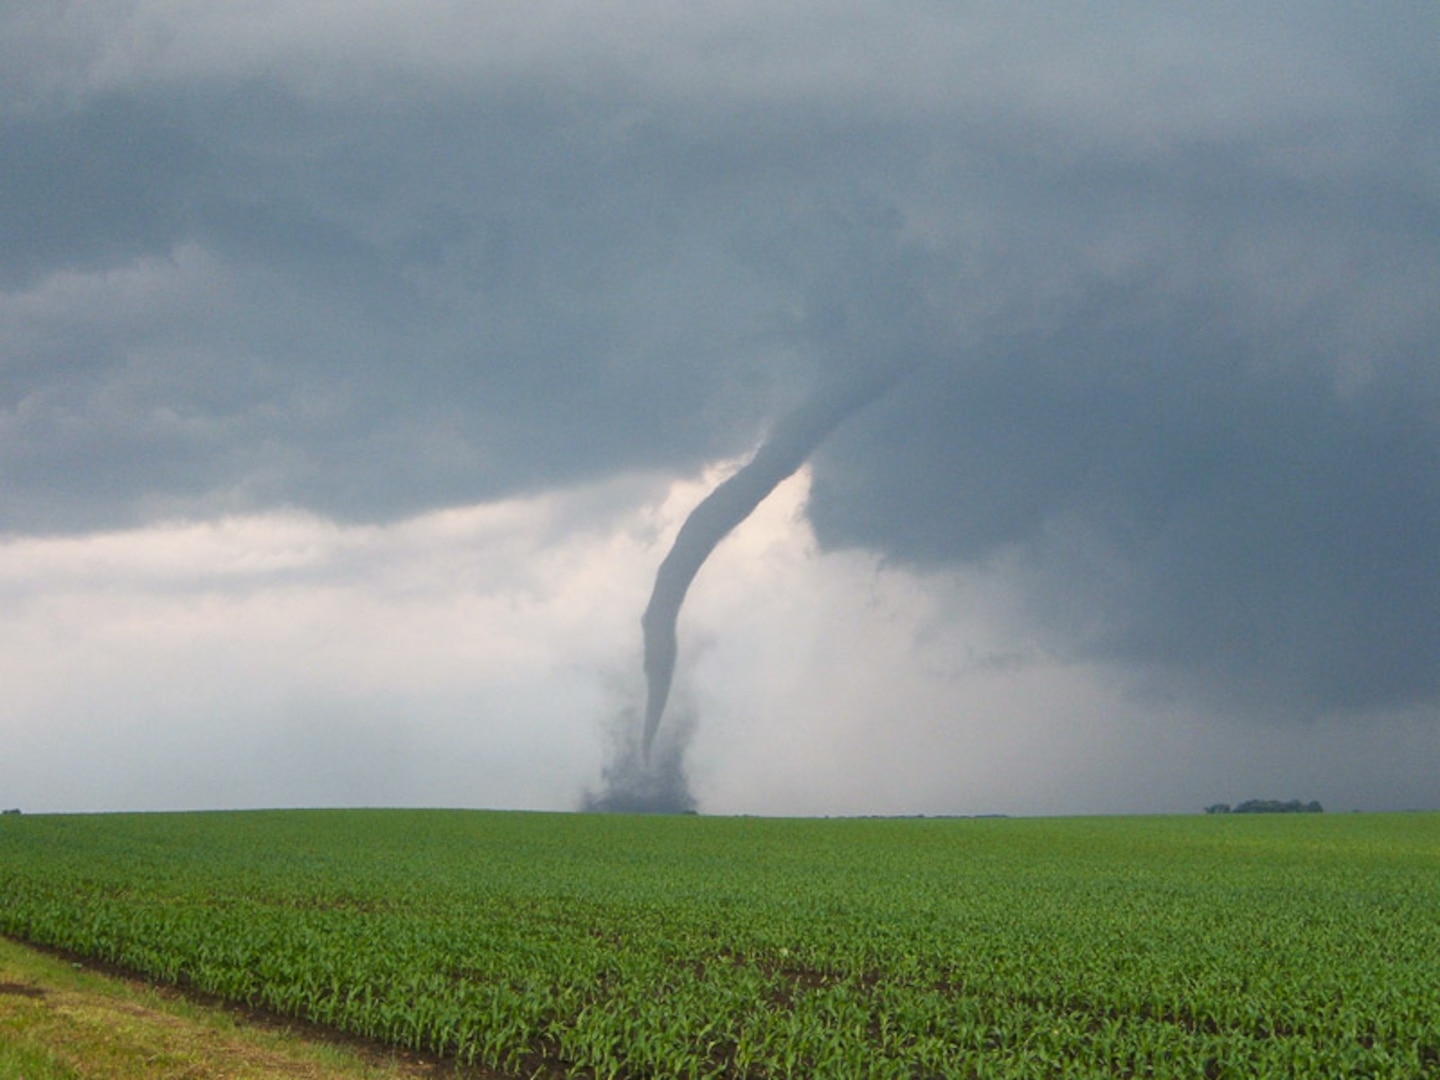 DLA Installation Management Susquehanna’s Prepareathon topic #2: Severe Weather – Thunderstorms and Tornadoes